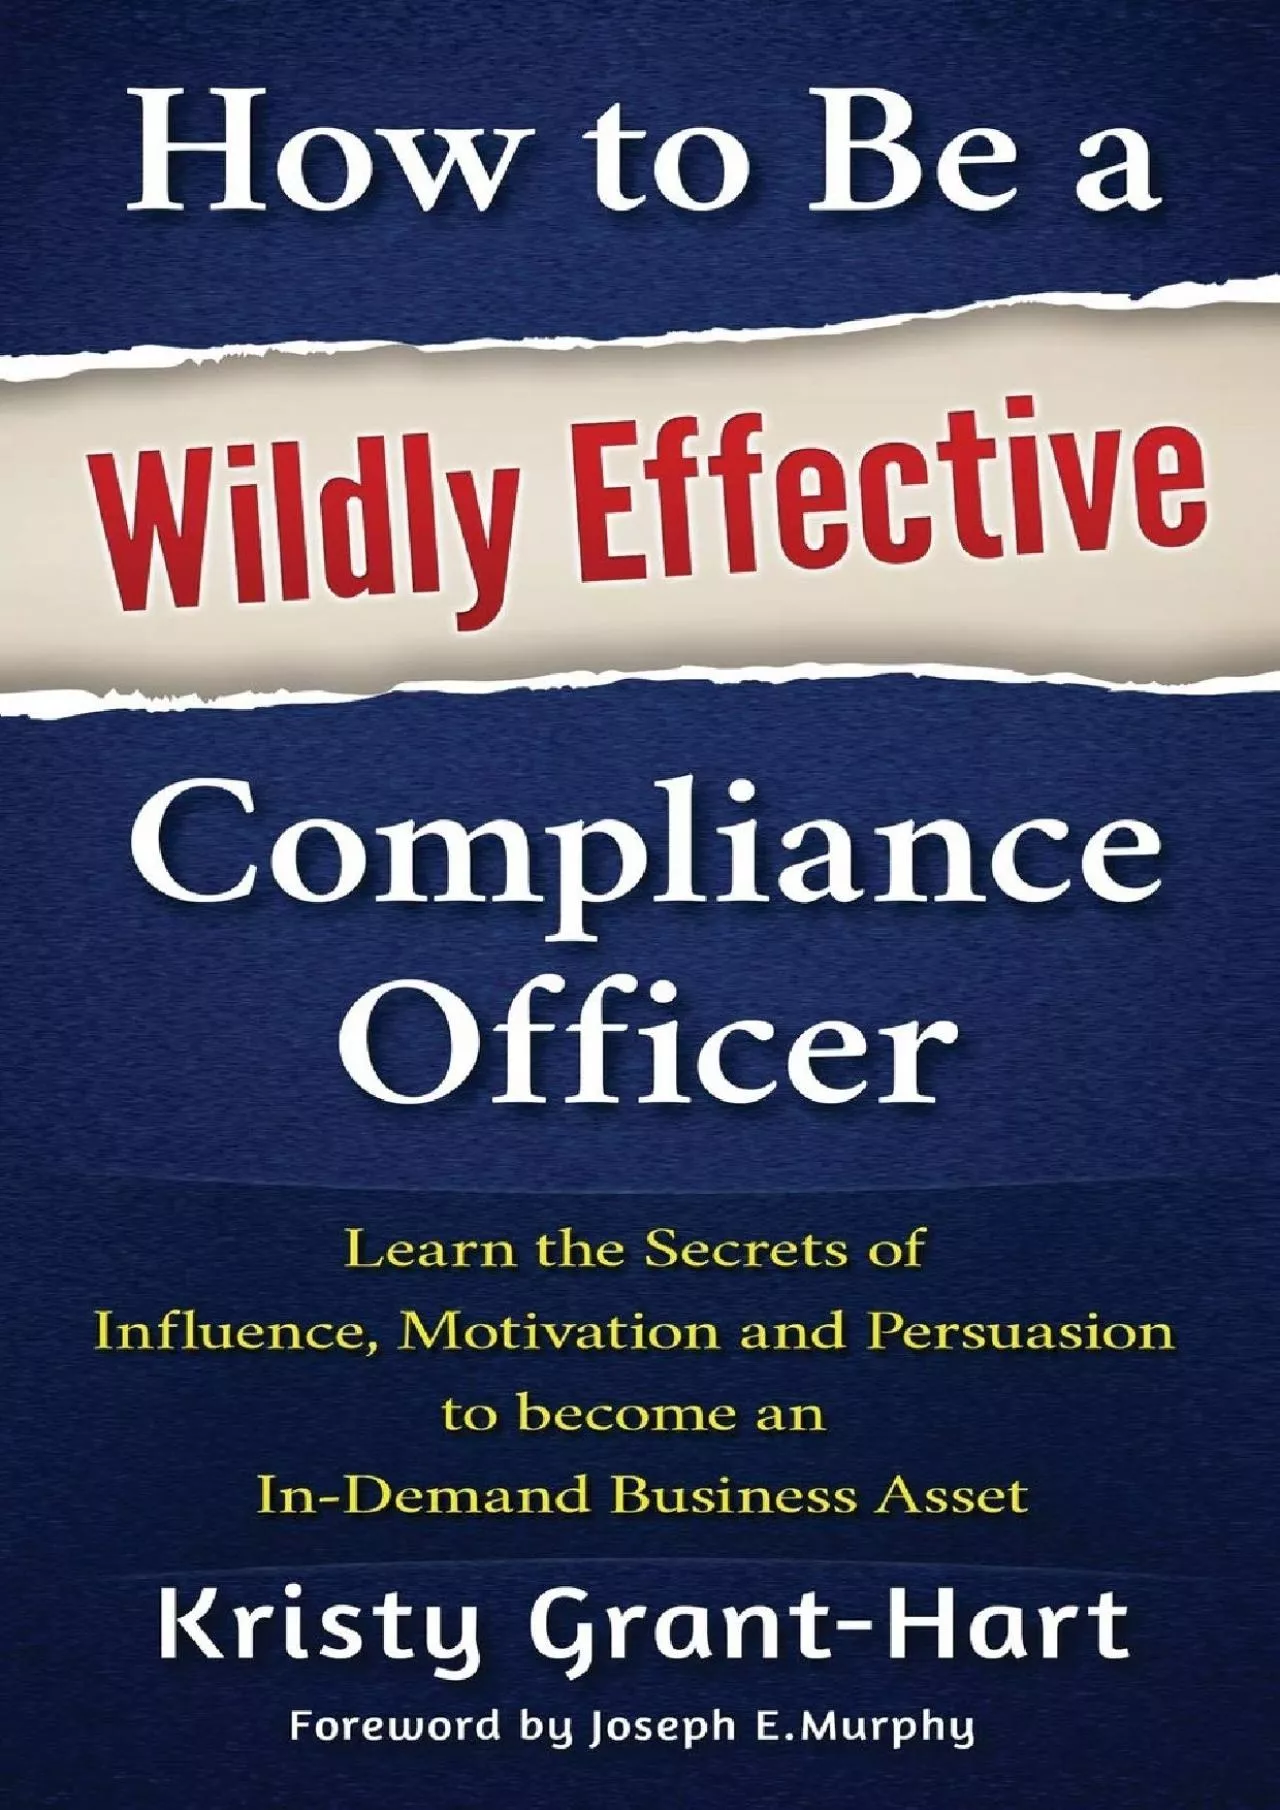 (EBOOK)-How to Be a Wildly Effective Compliance Officer: Learn the Secrets of Influence,